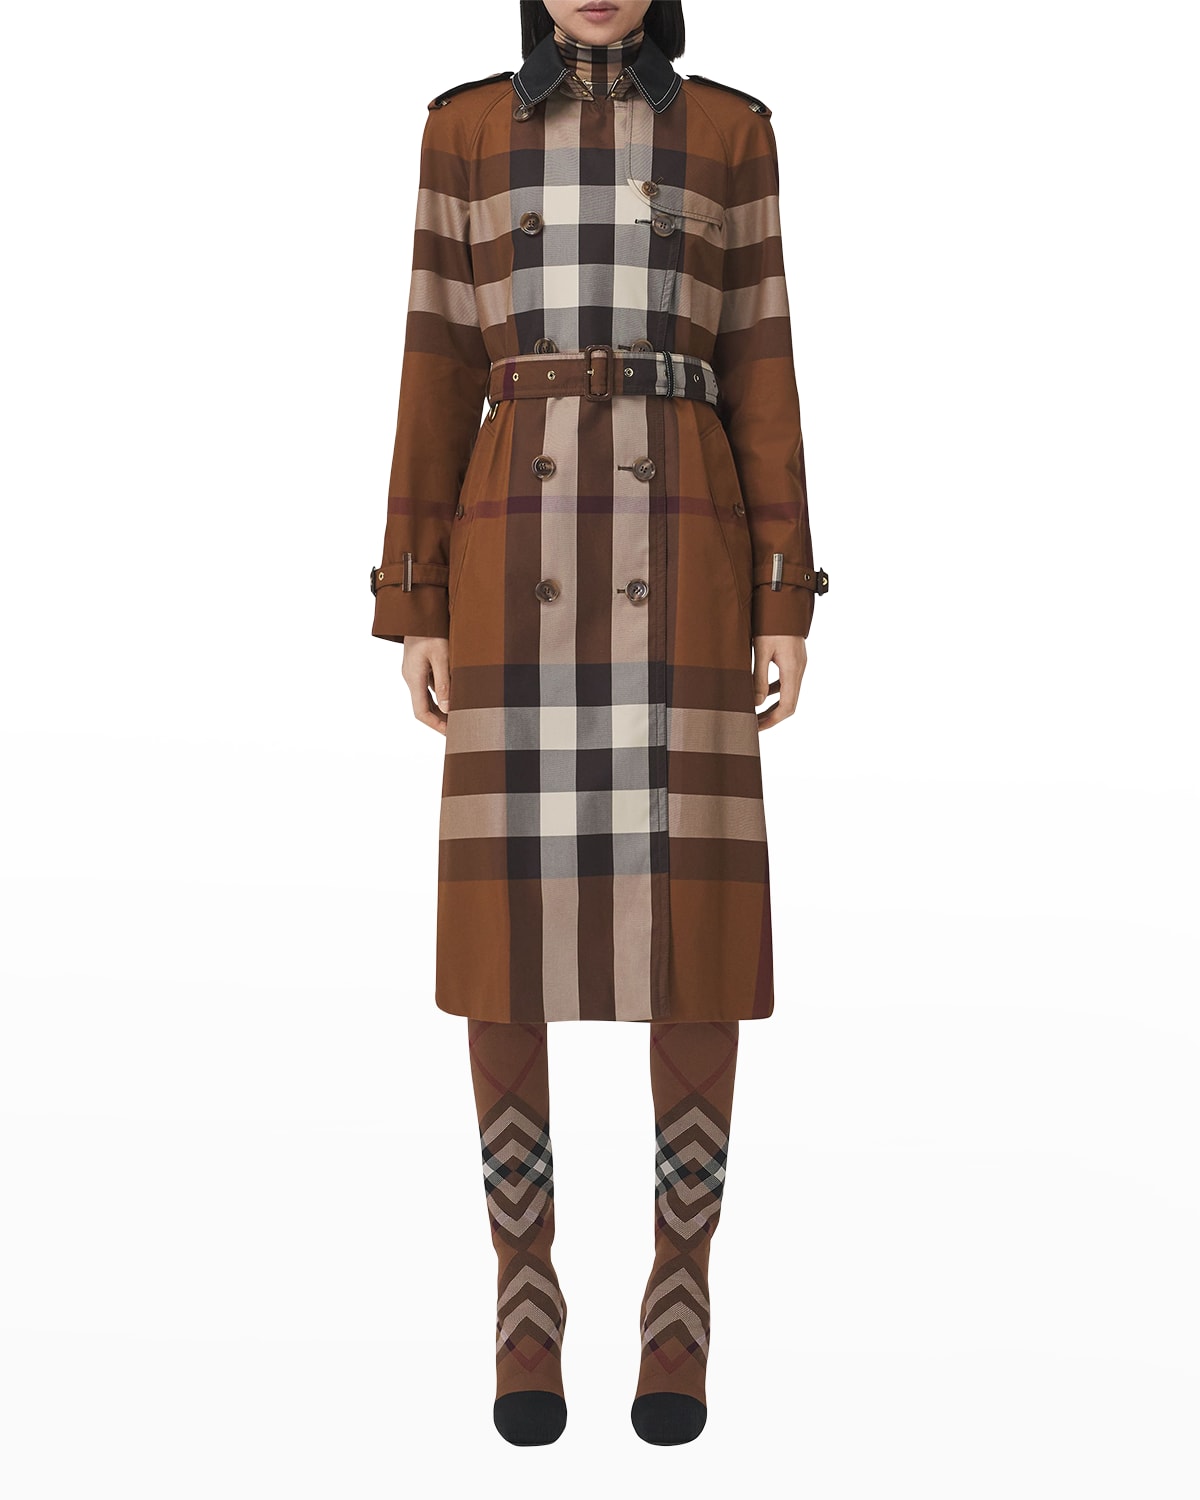 Burberry Waterloo Check-Print Double-Breasted Trench Coat